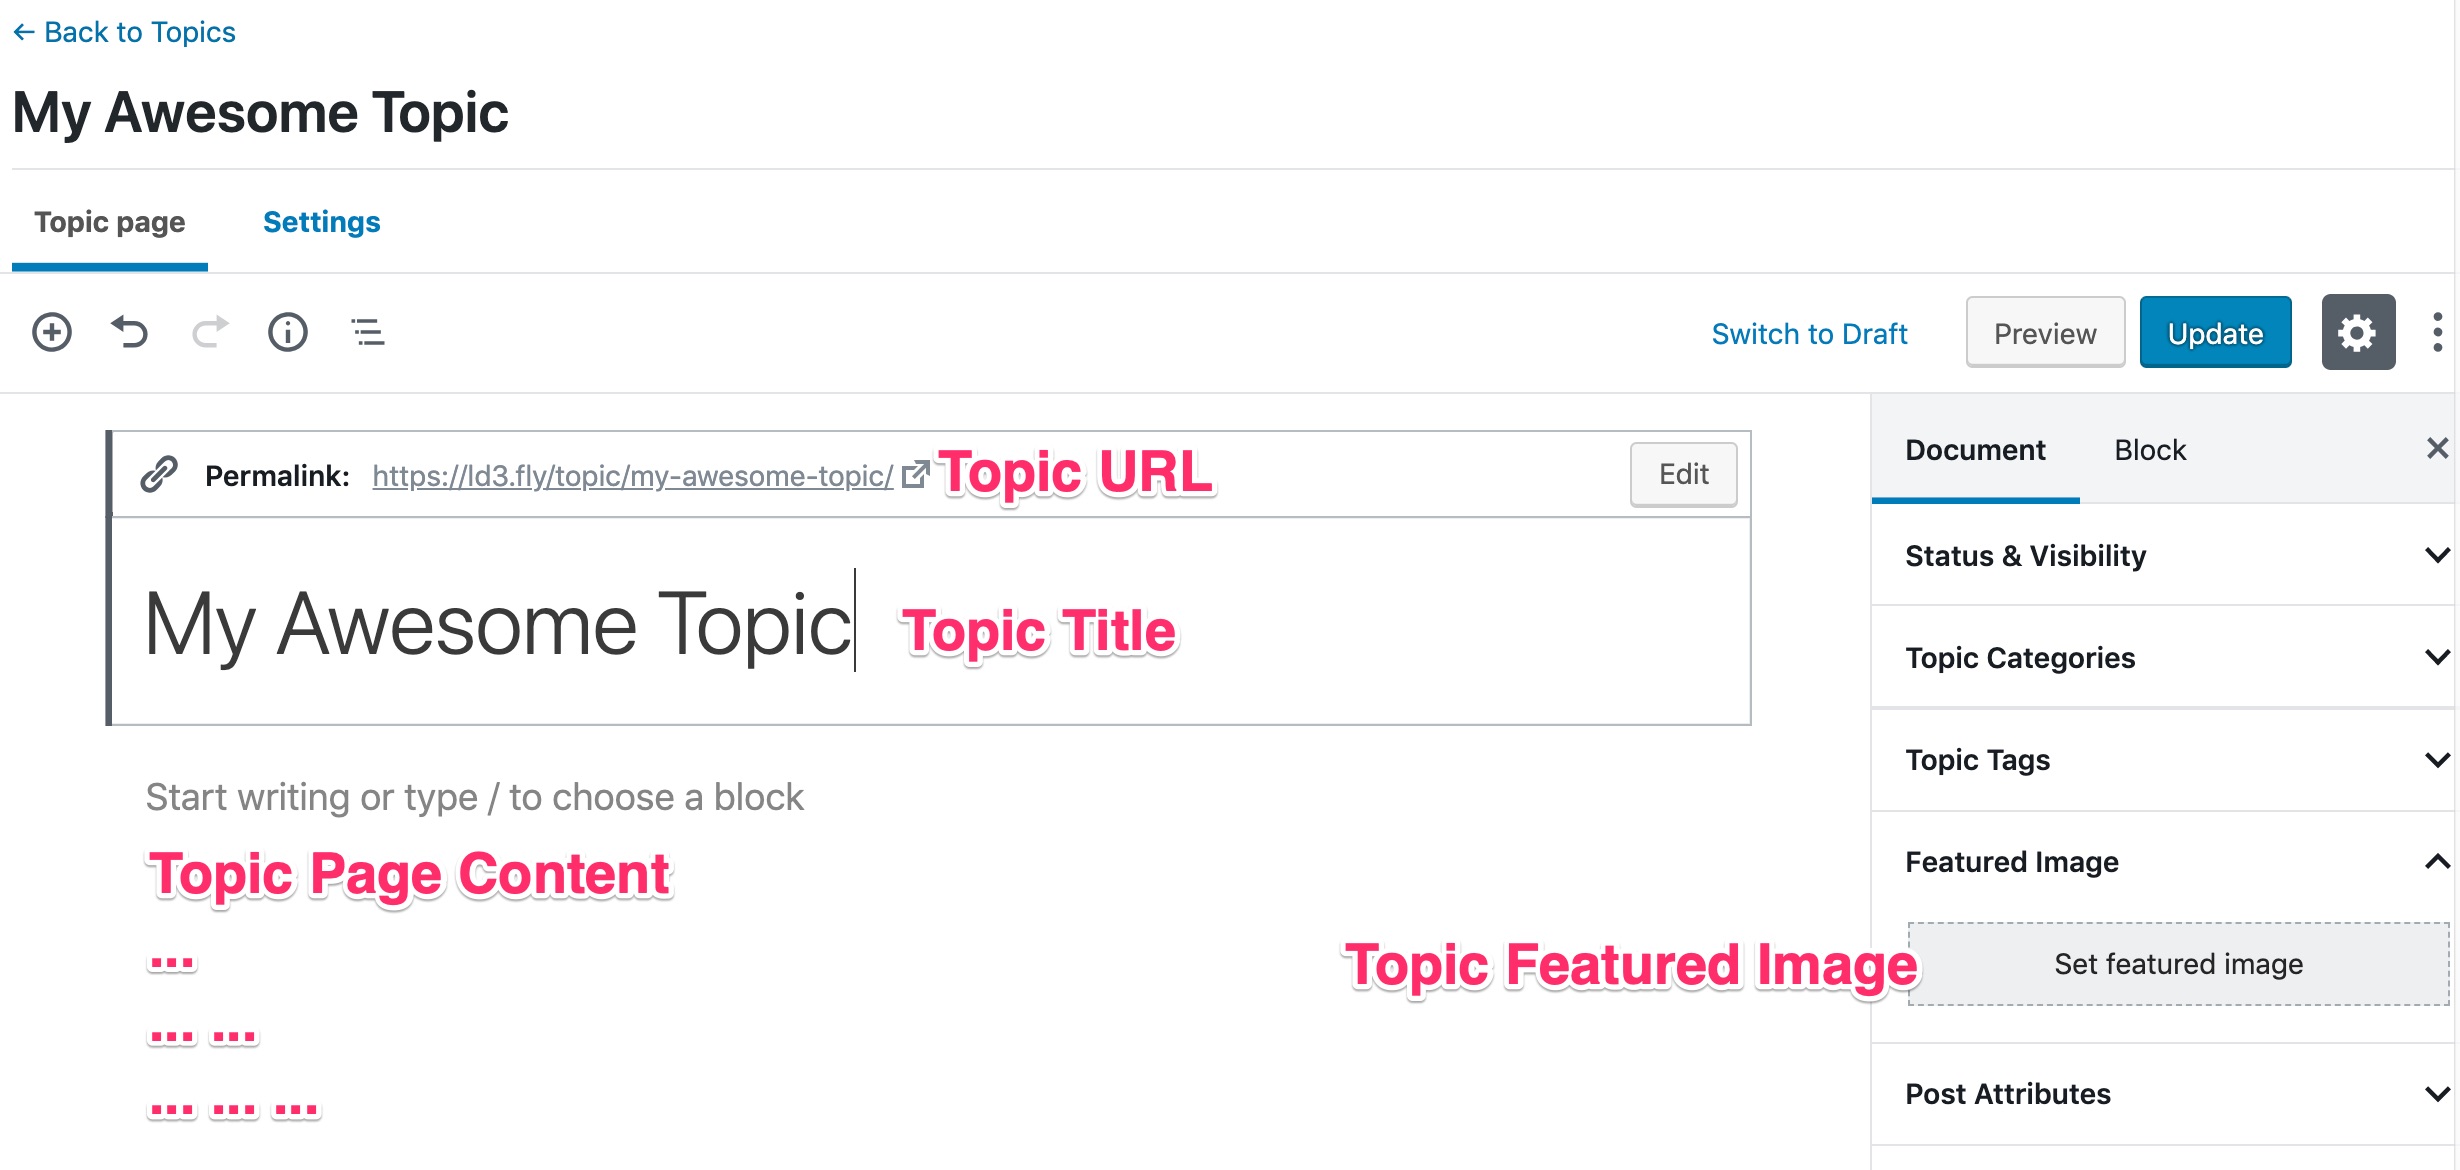 LearnDash topic page content overview